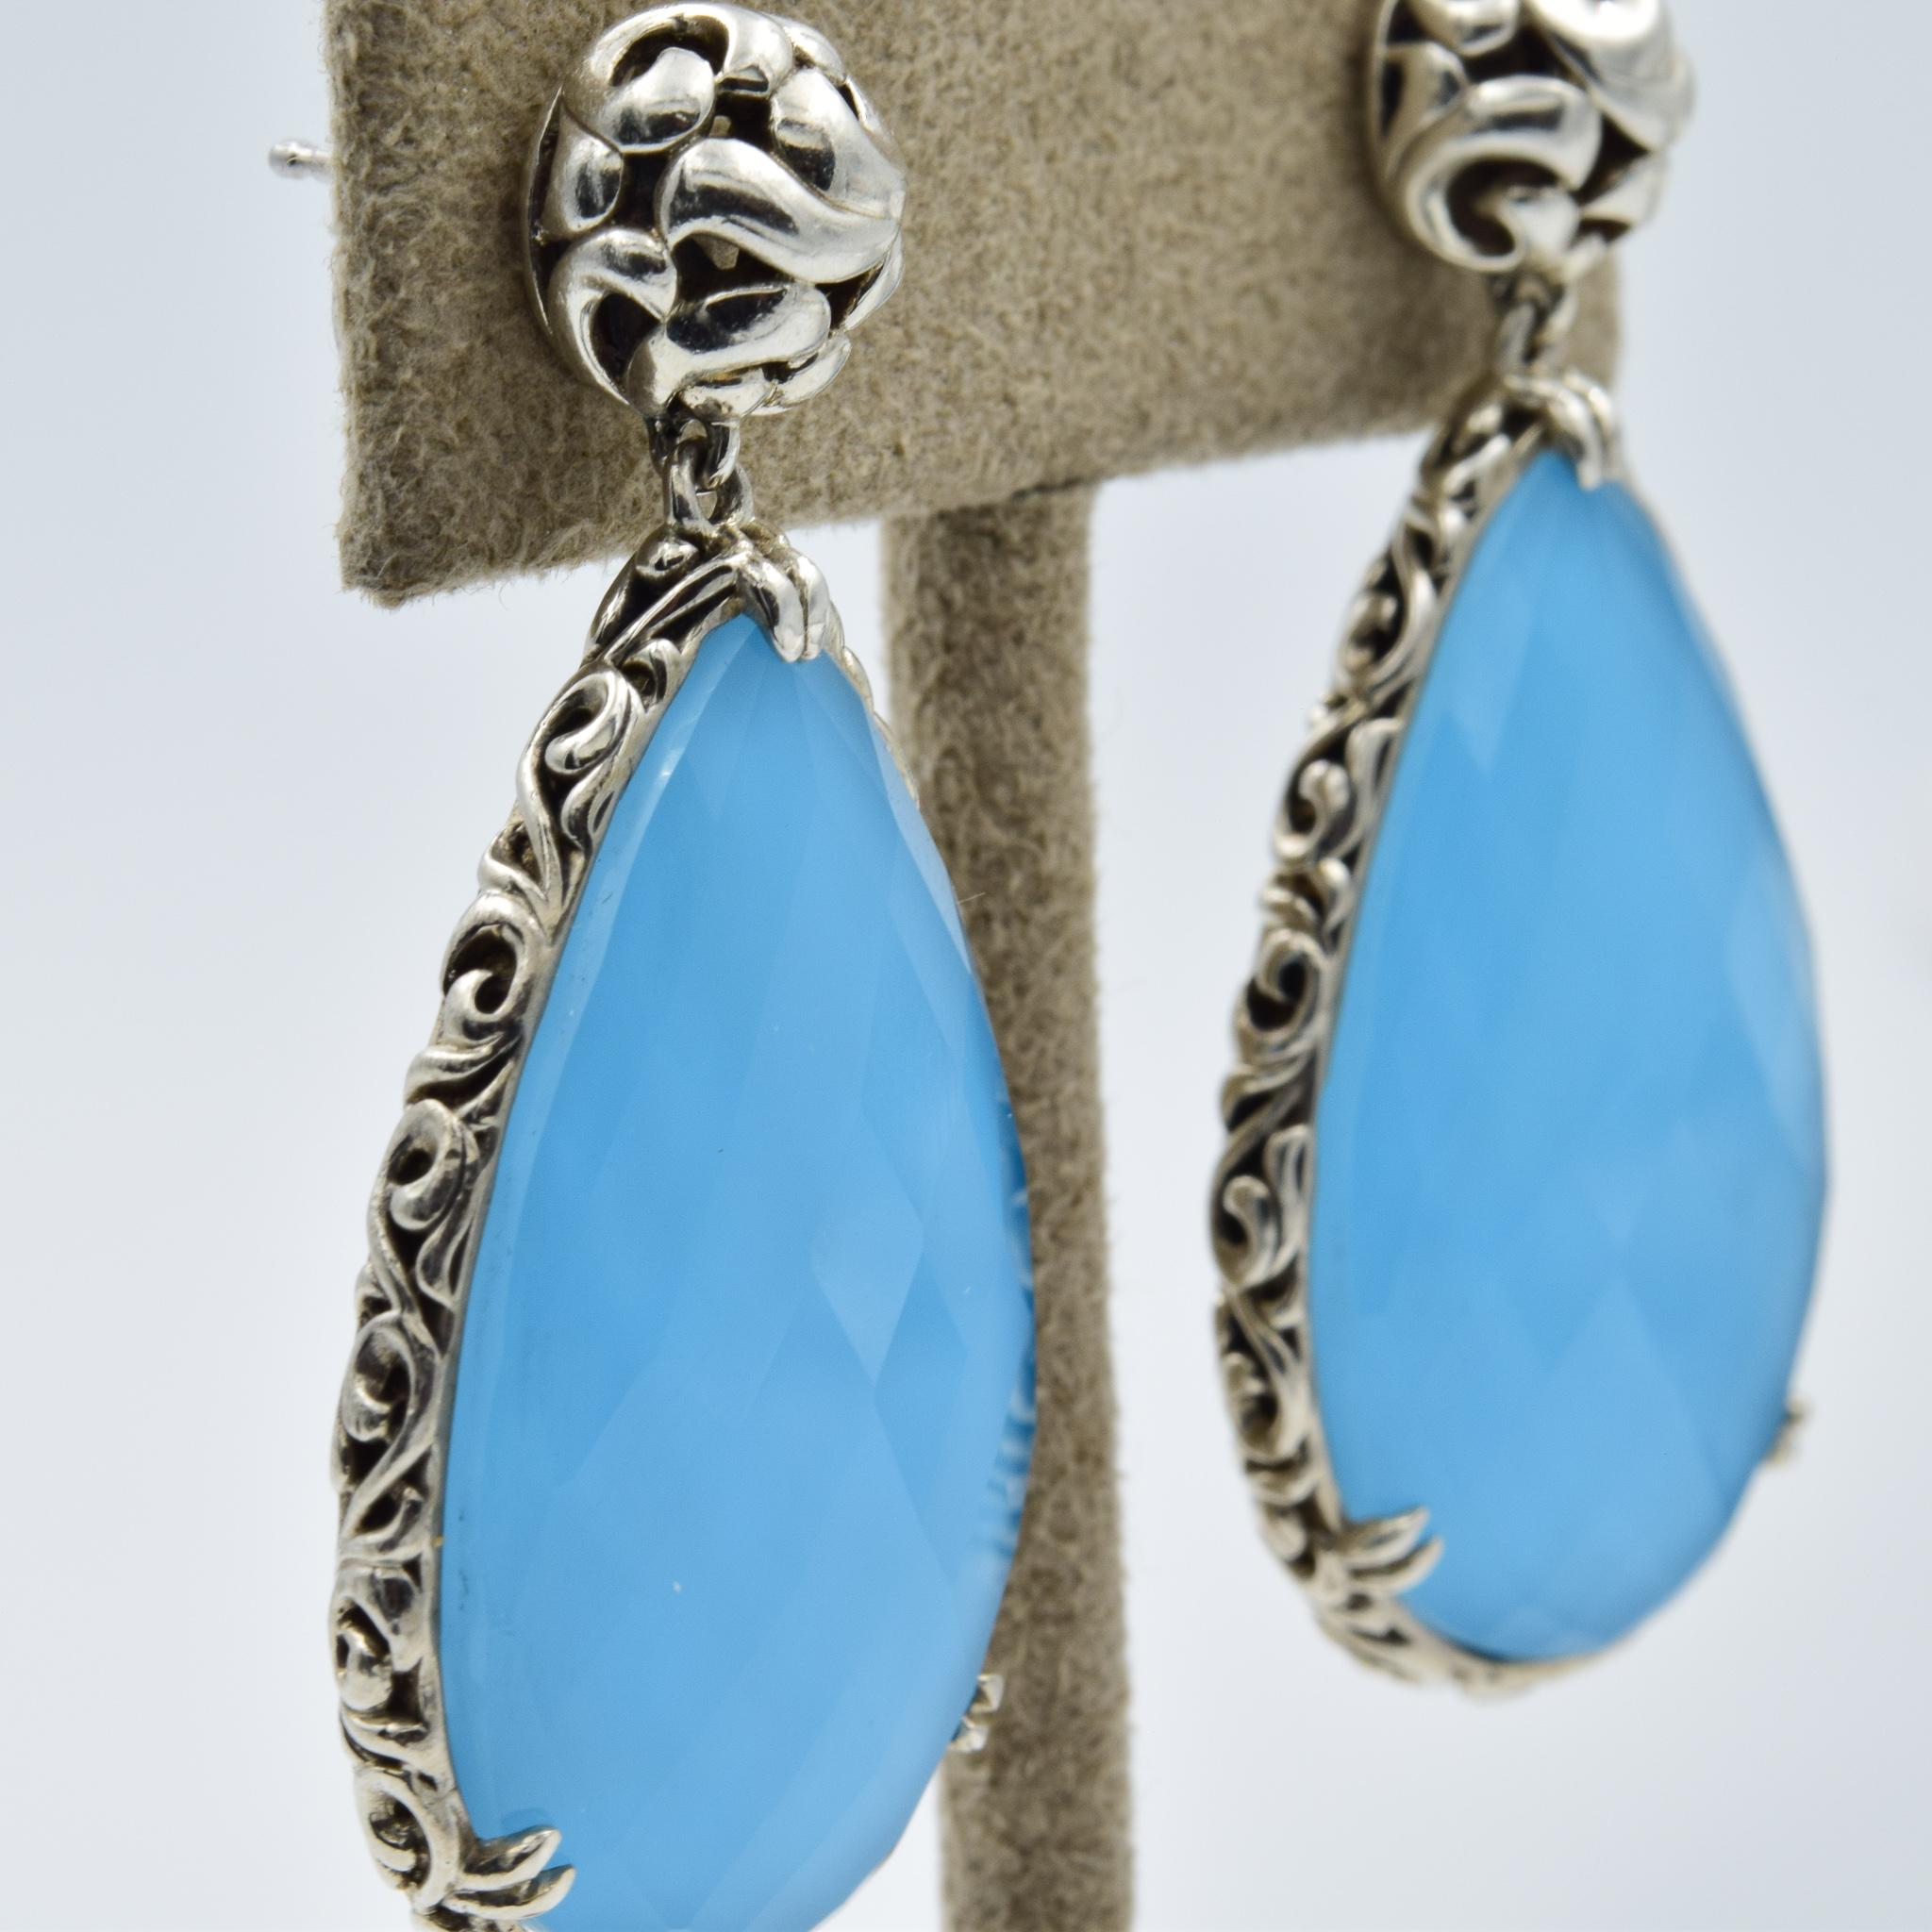 These Charles Krypell earrings are beautiful and in fantastic condition.  They were just traded in to the store.  The turquoise has a quartz crystal overlay which gives a unique pattern on the stone in the lighting.  

Dimensions: 
Width: 23